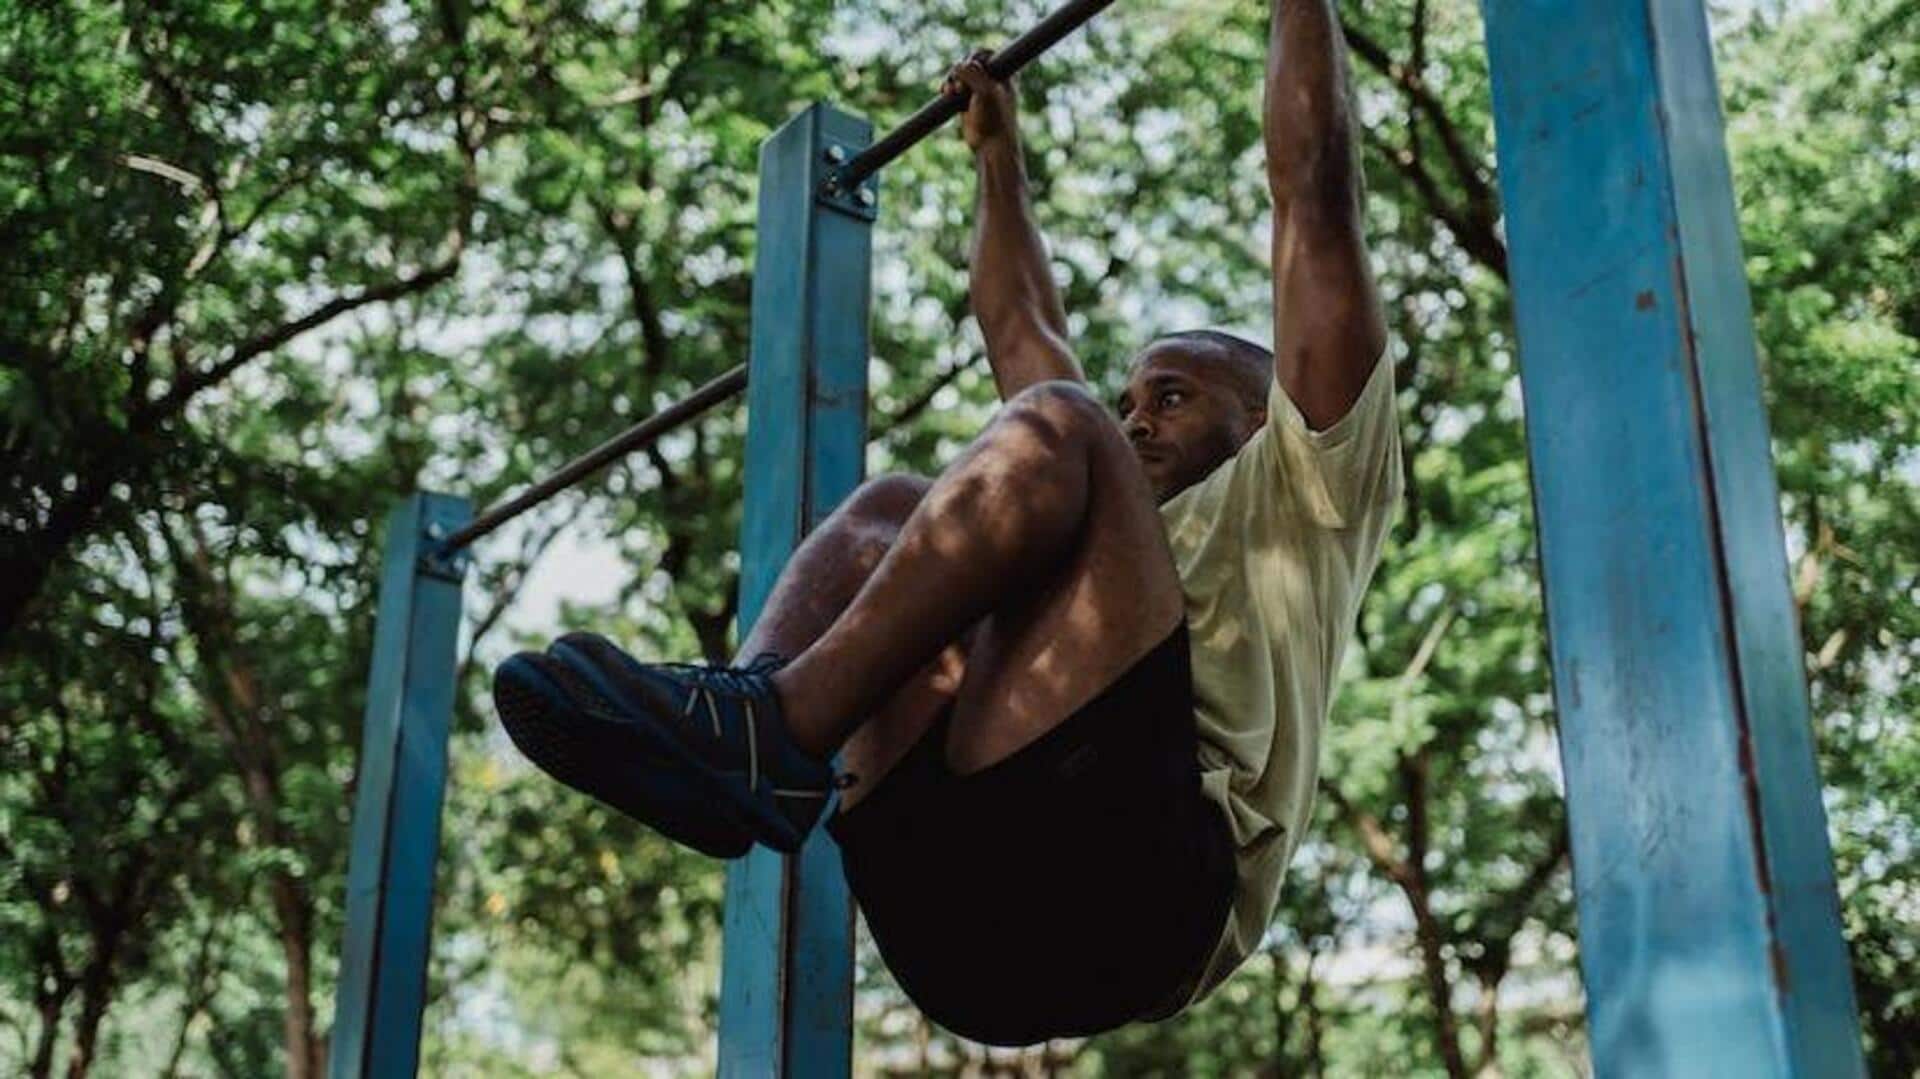 Exercises using pull-up bars that are fun and easy